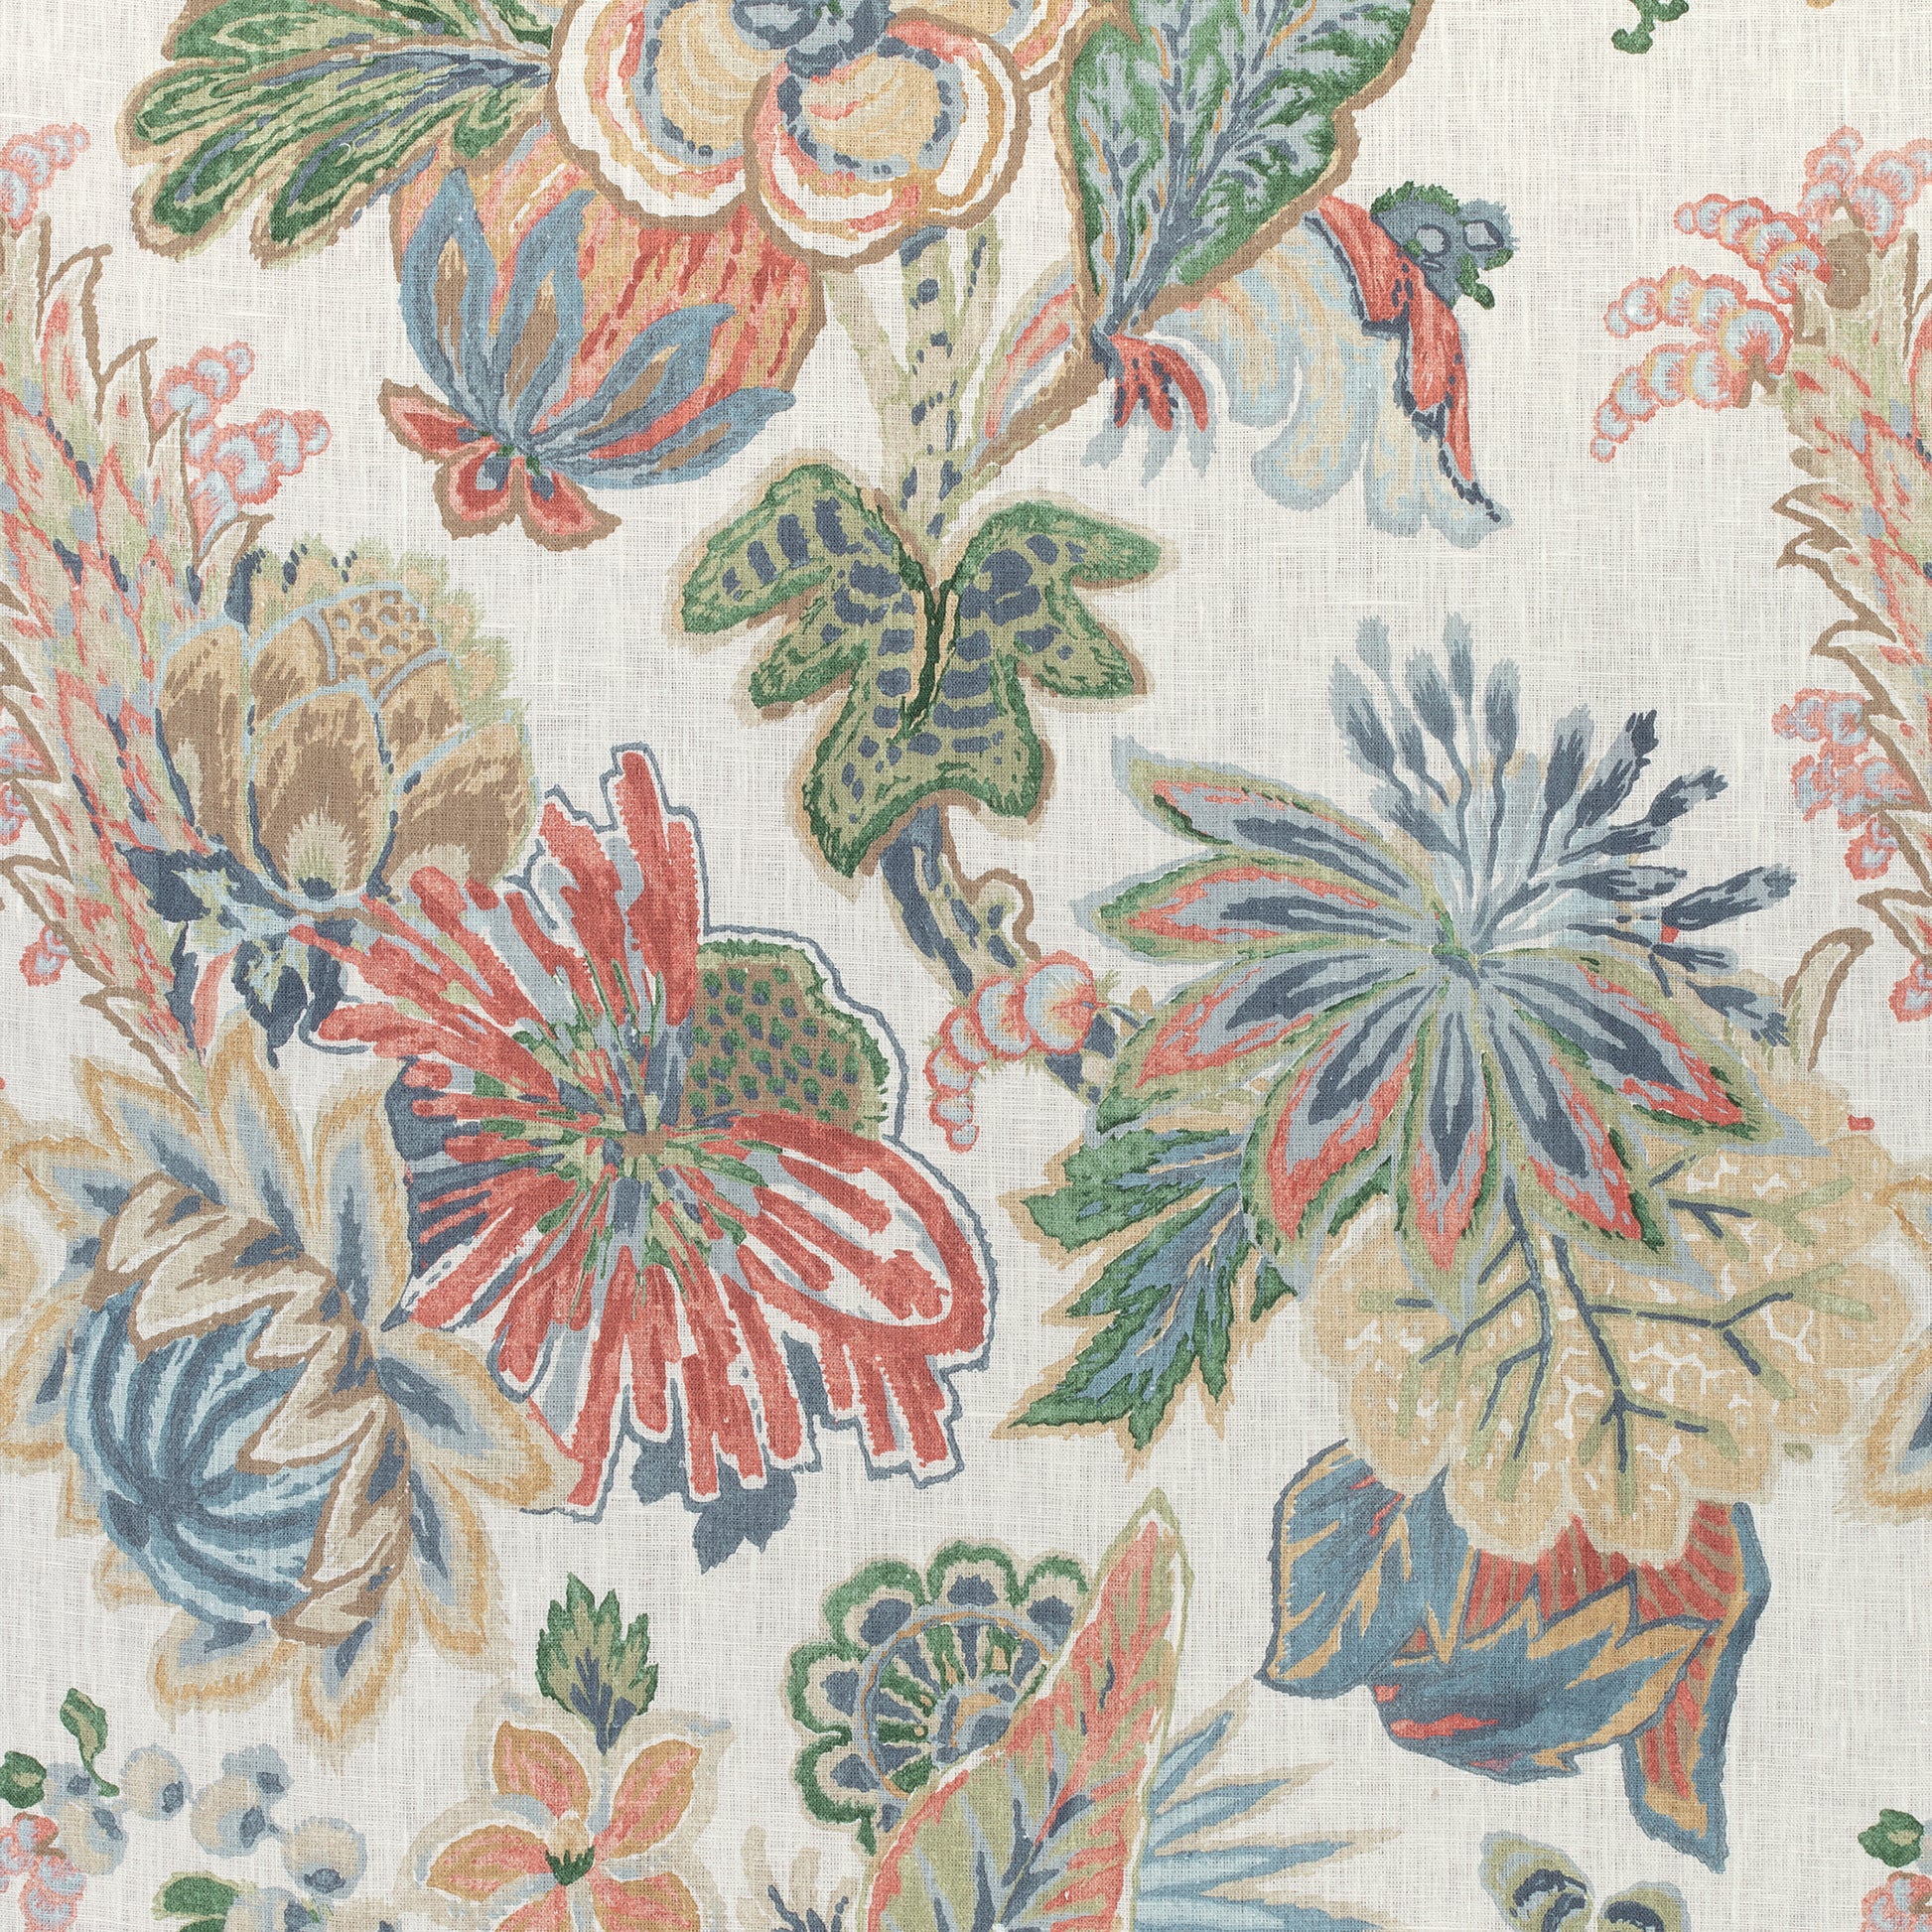 Buy samples of F910217 Floral Gala Printed Colony Thibaut Fabrics